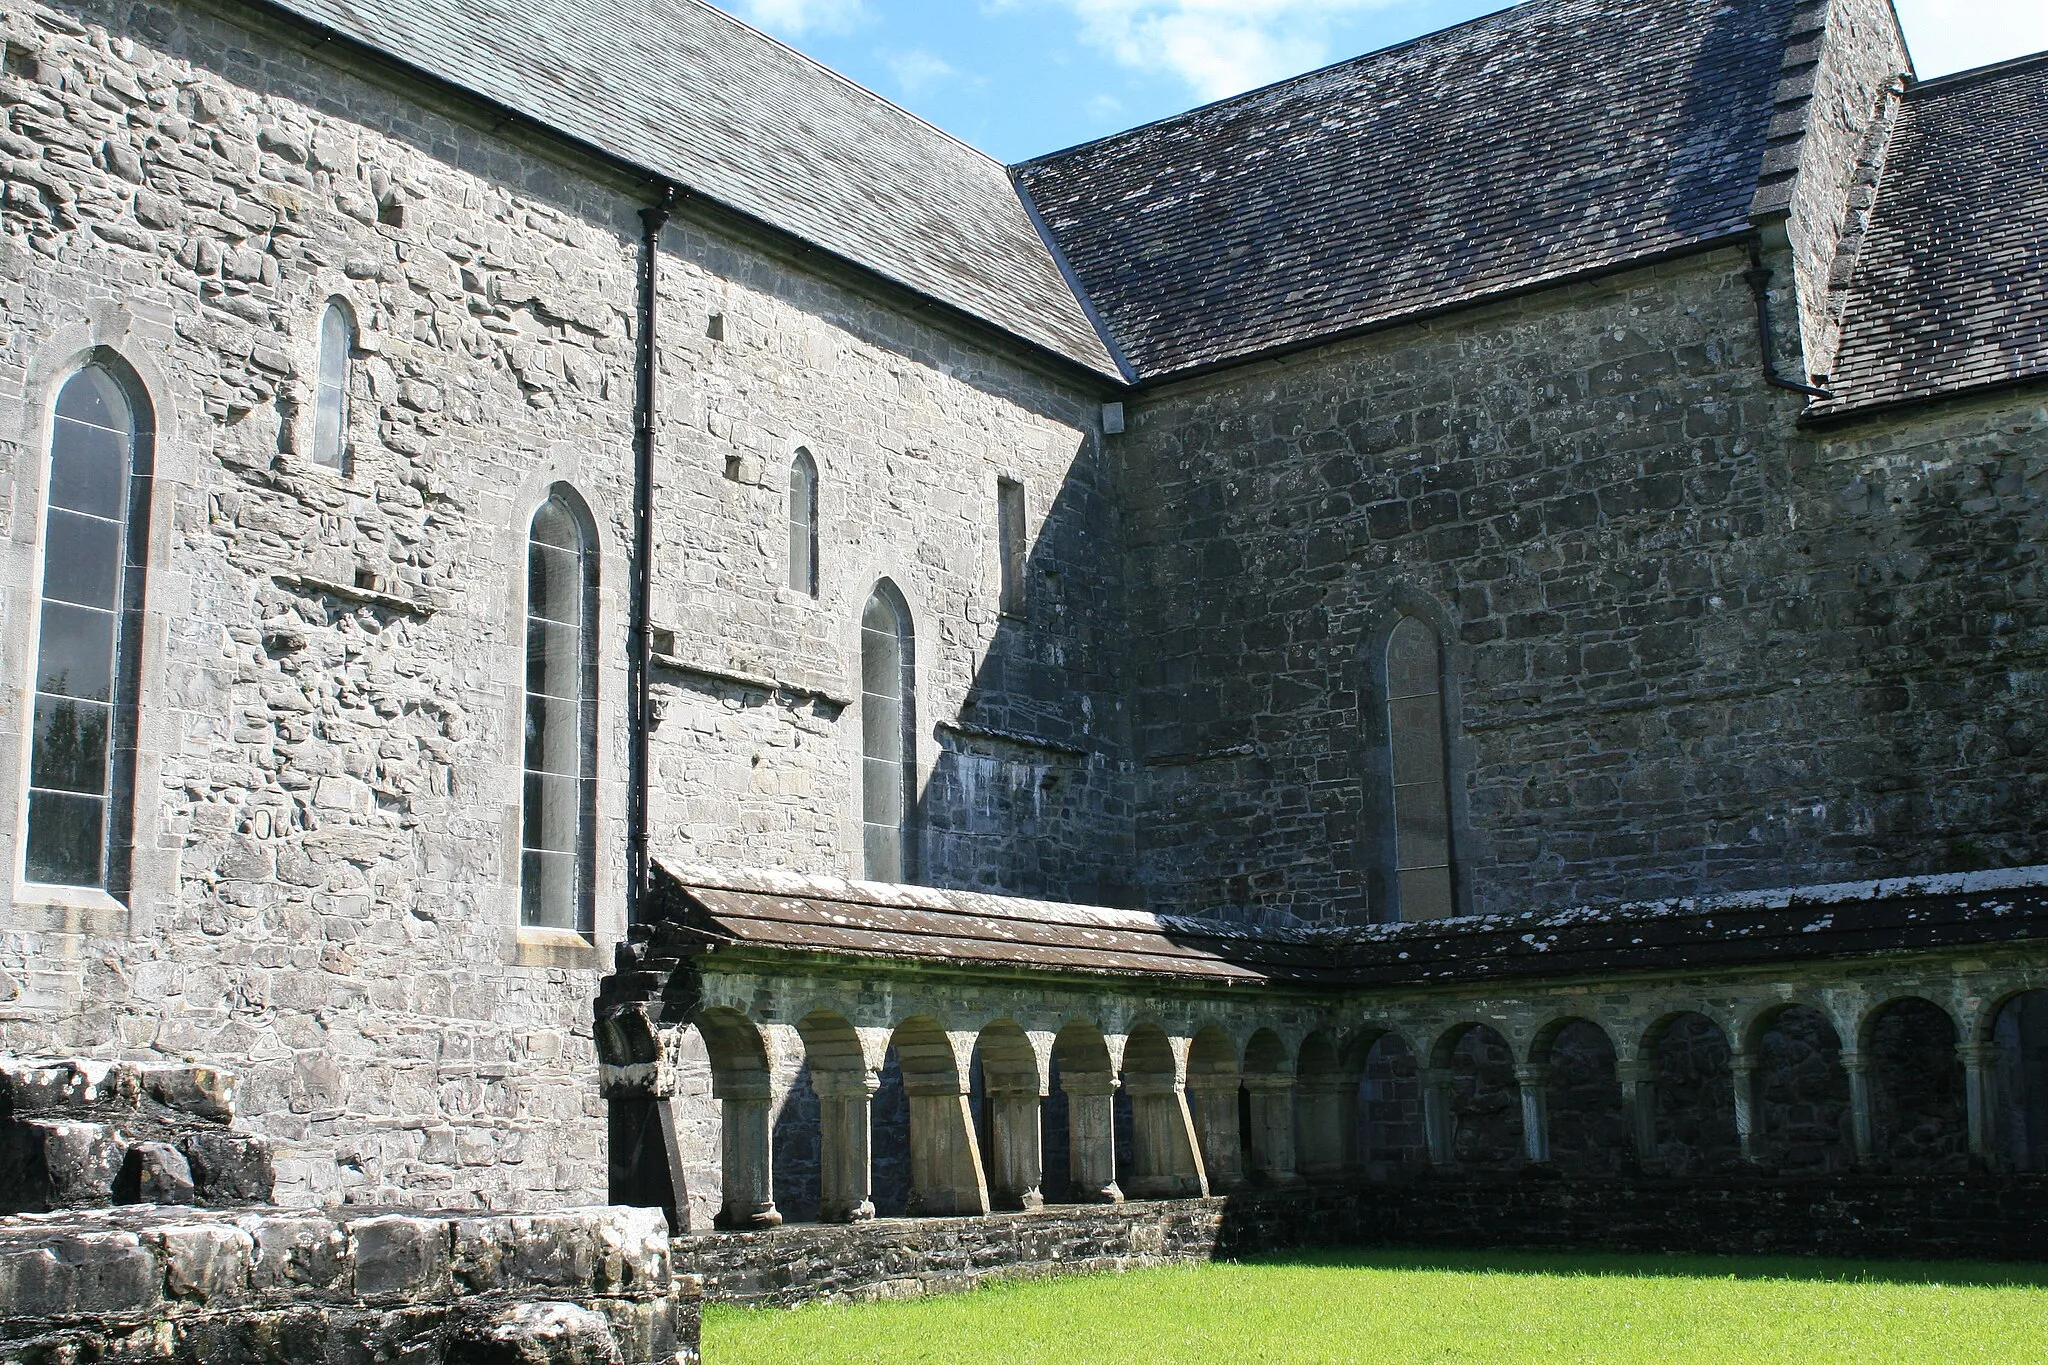 Photo showing: Ballintubber, County Mayo, Ireland

Northeast corner of the cloister garth at Ballintubber Abbey.